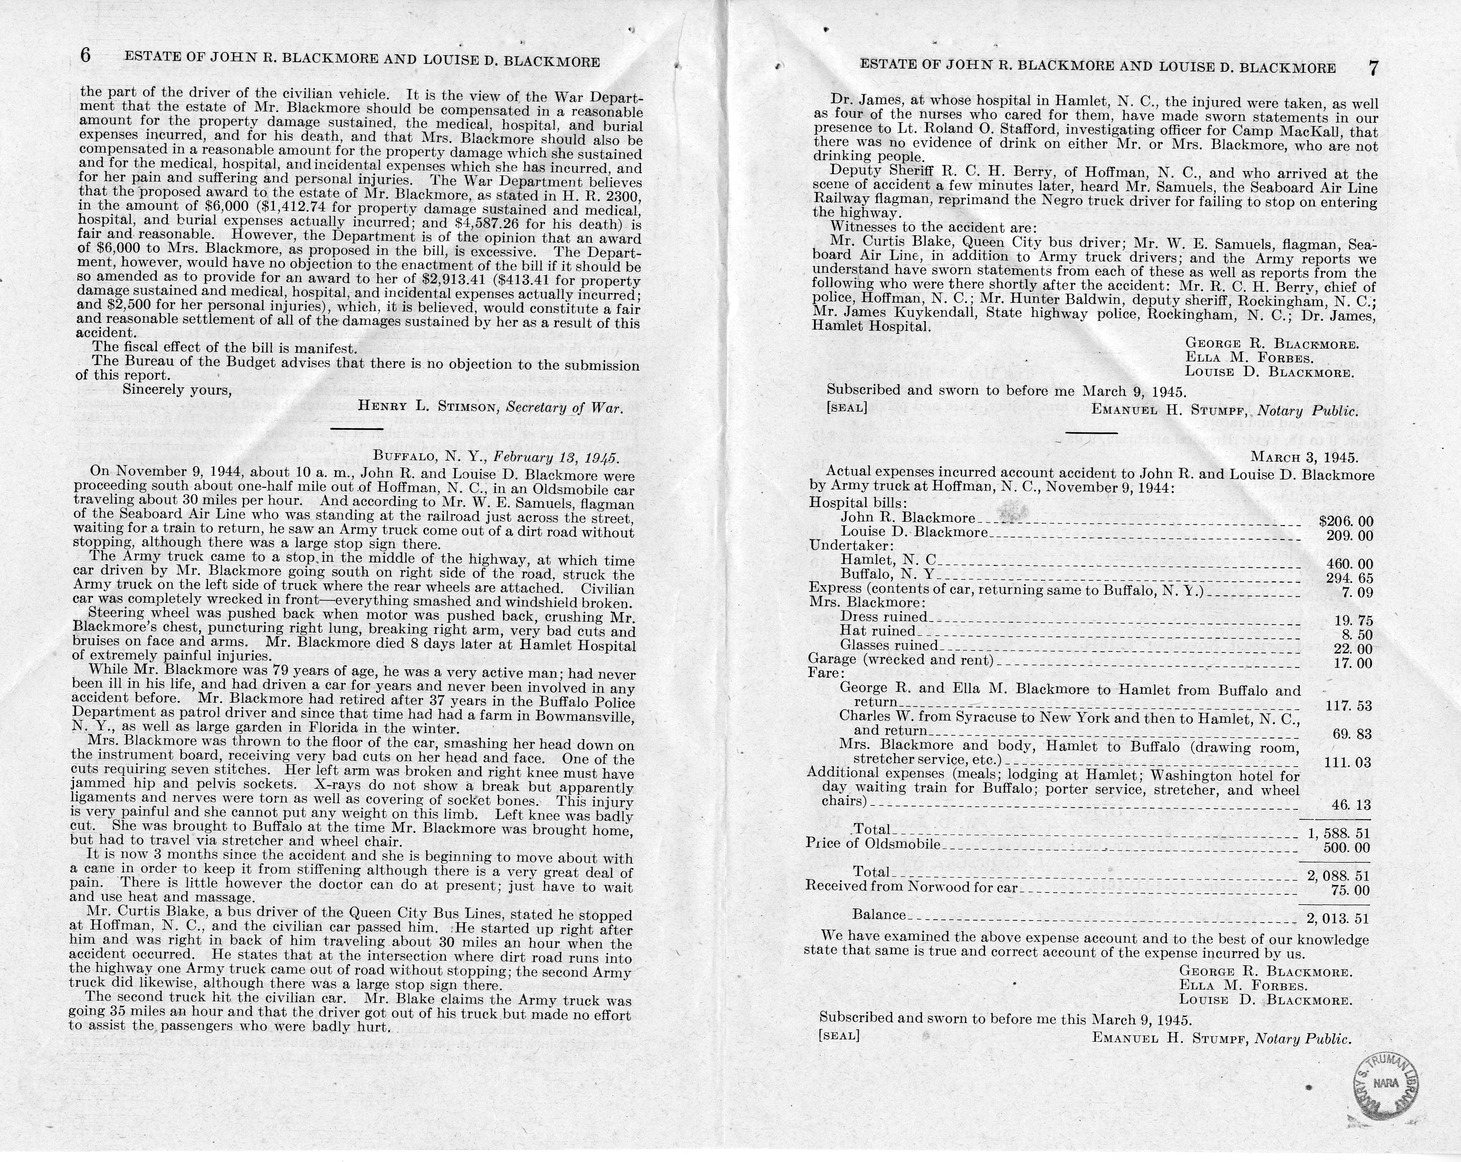 Memorandum from Frederick J. Bailey to M. C. Latta, H.R. 2300, For the Relief of the Estate of John R. Blackmore and Louise D. Blackmore, with Attachments